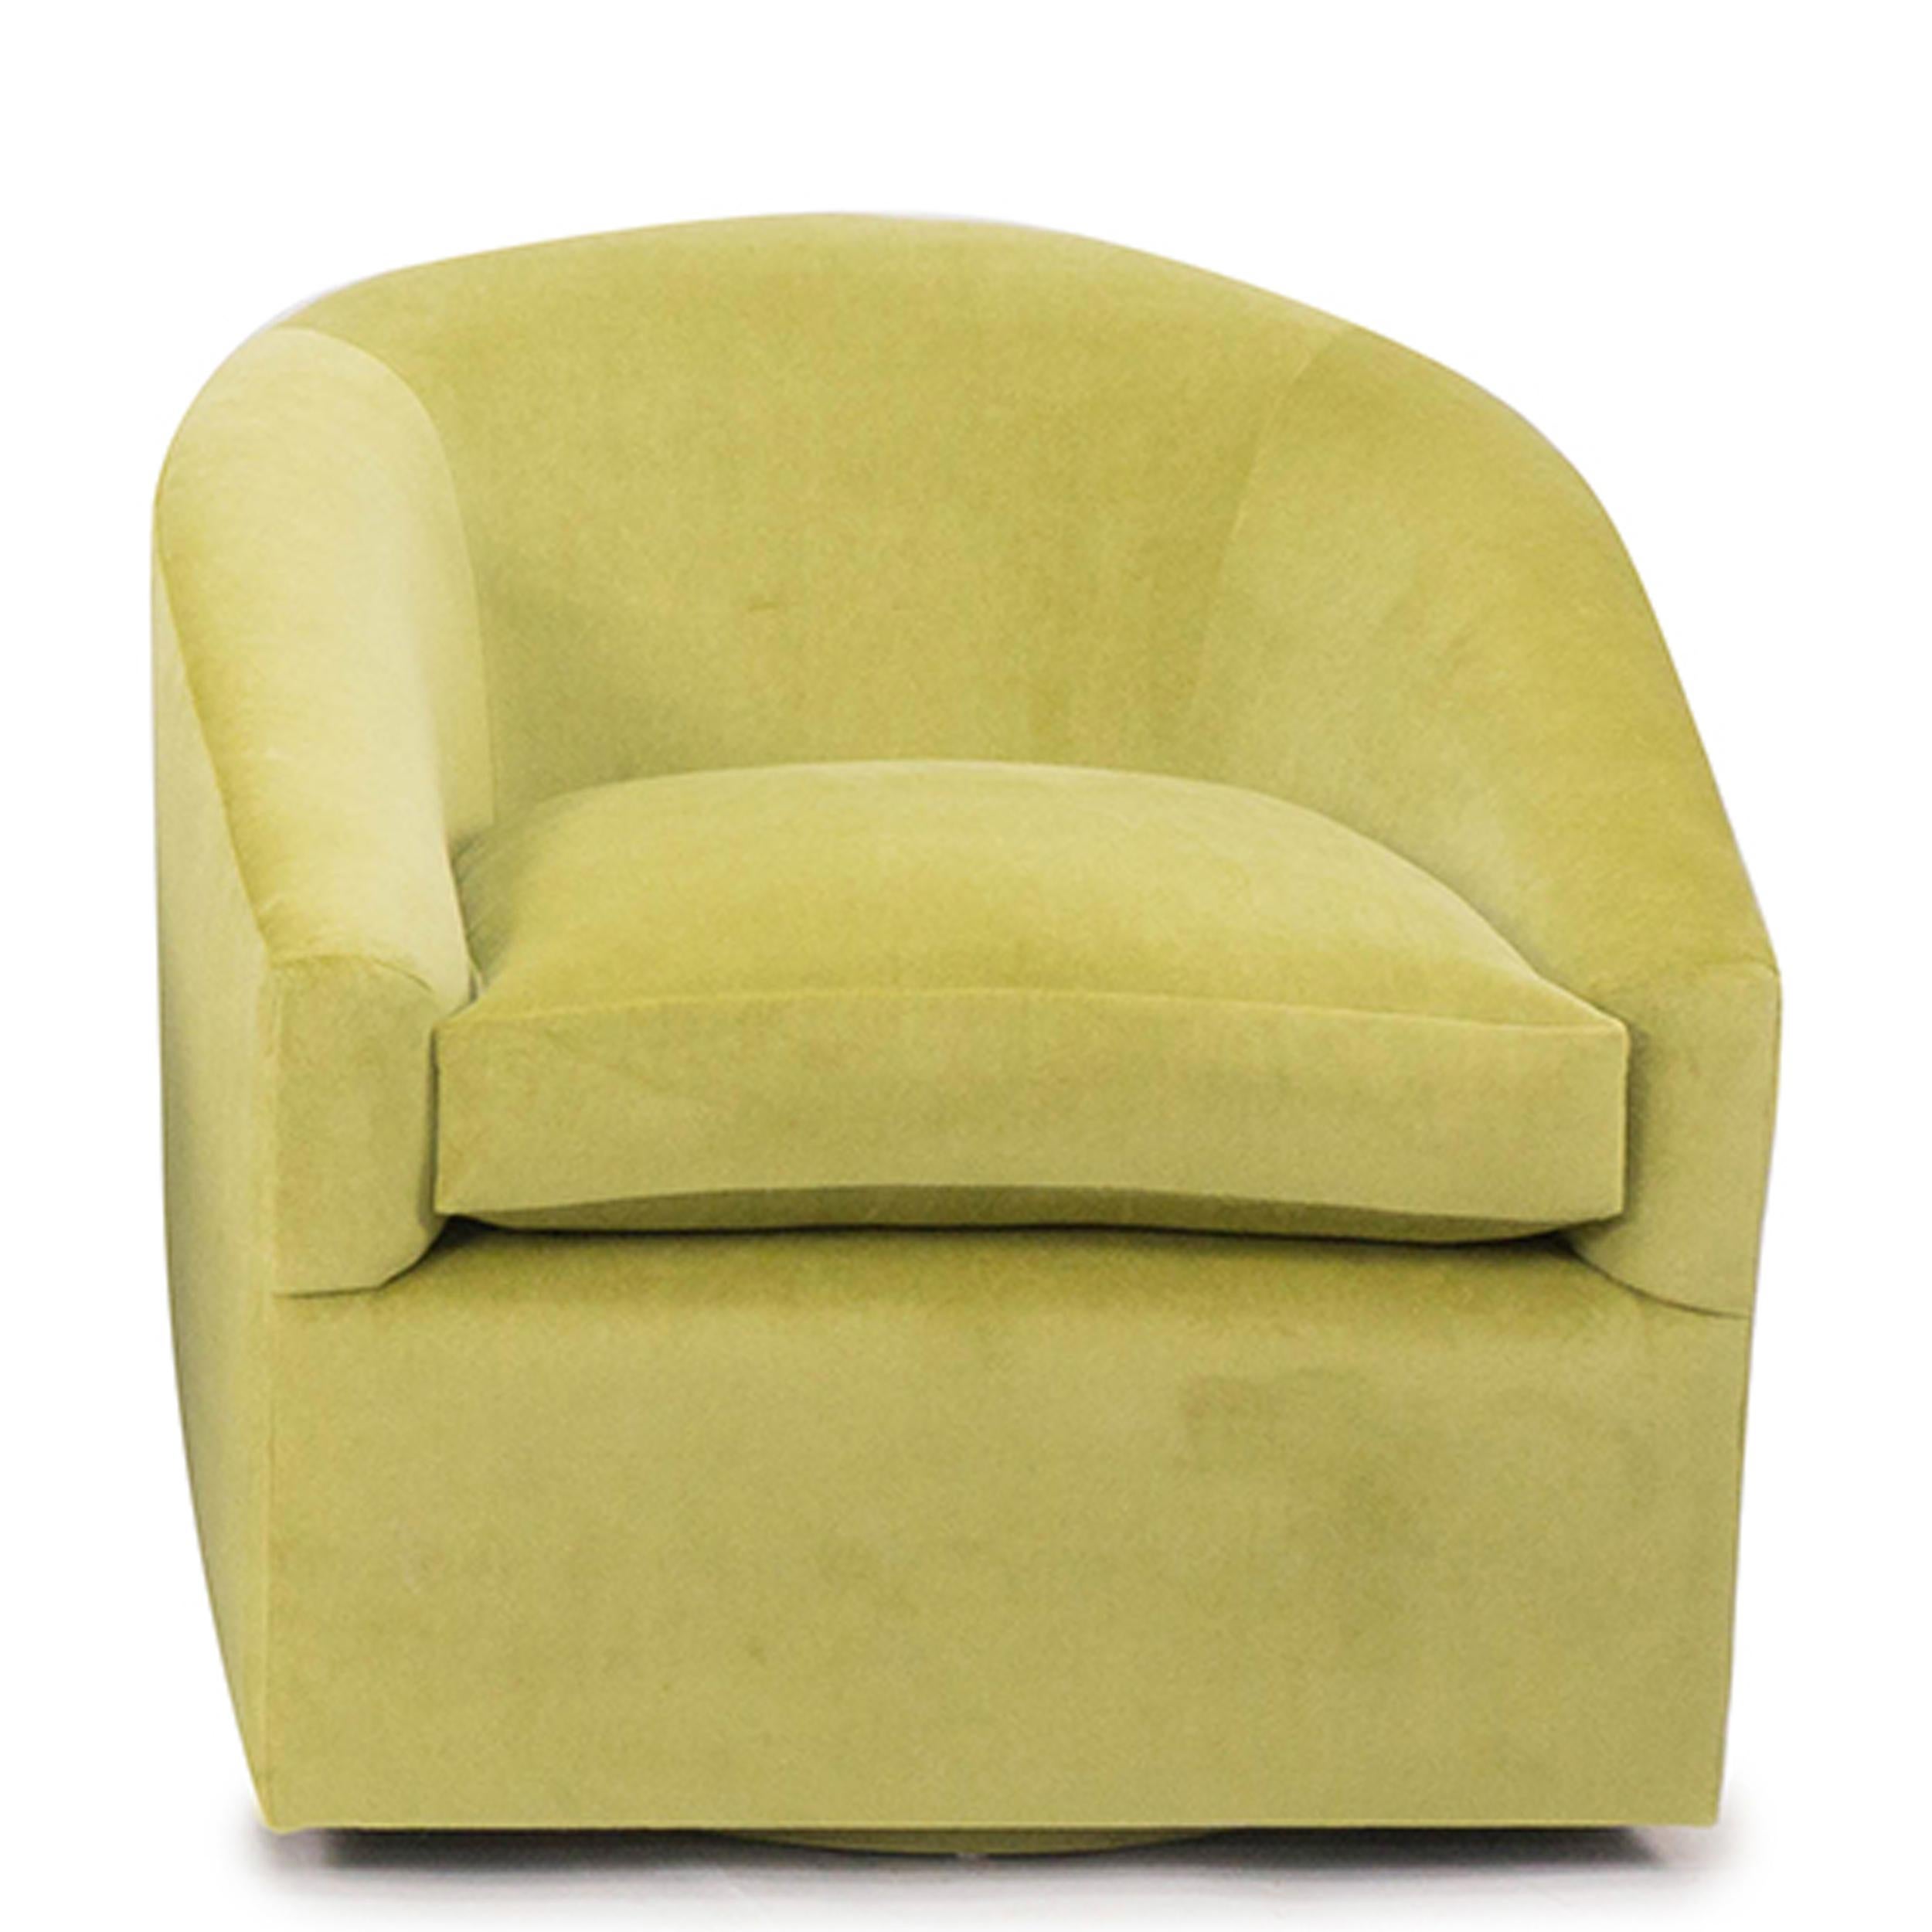 Our swivel chair is crafted out of solid hard maple with a firm back and a solid 8-way hand tied spring base. Covered in a lush lime green velvet, the gentle sloping arms and feather/down foam wrapped seat cushion gives excellent support & comfort.